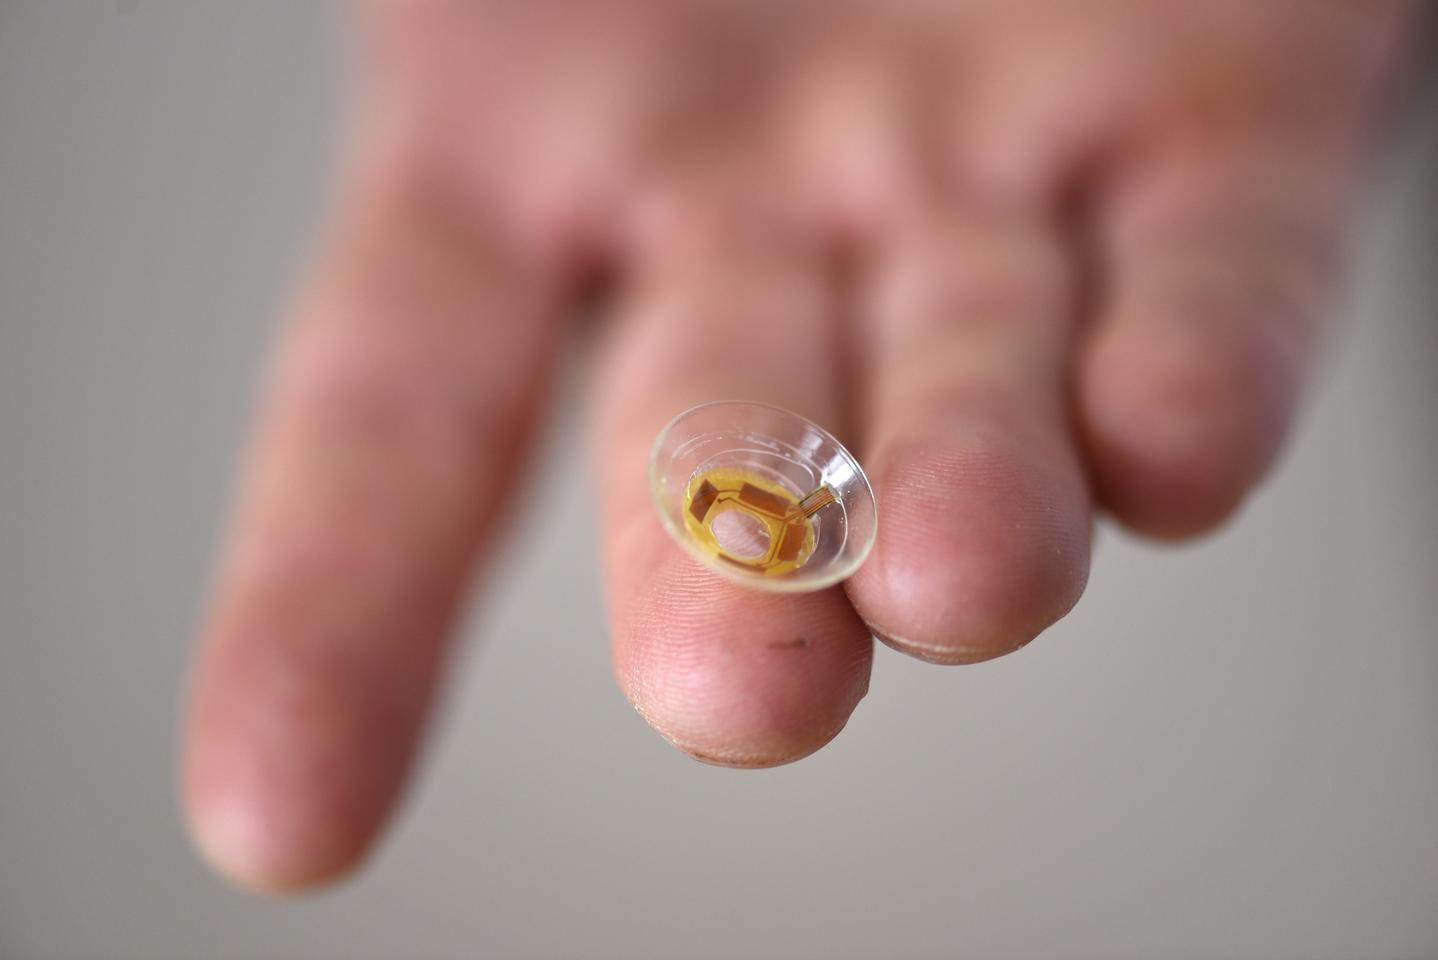 A standalone contact lens with an onboard power supply could serve all kinds uses